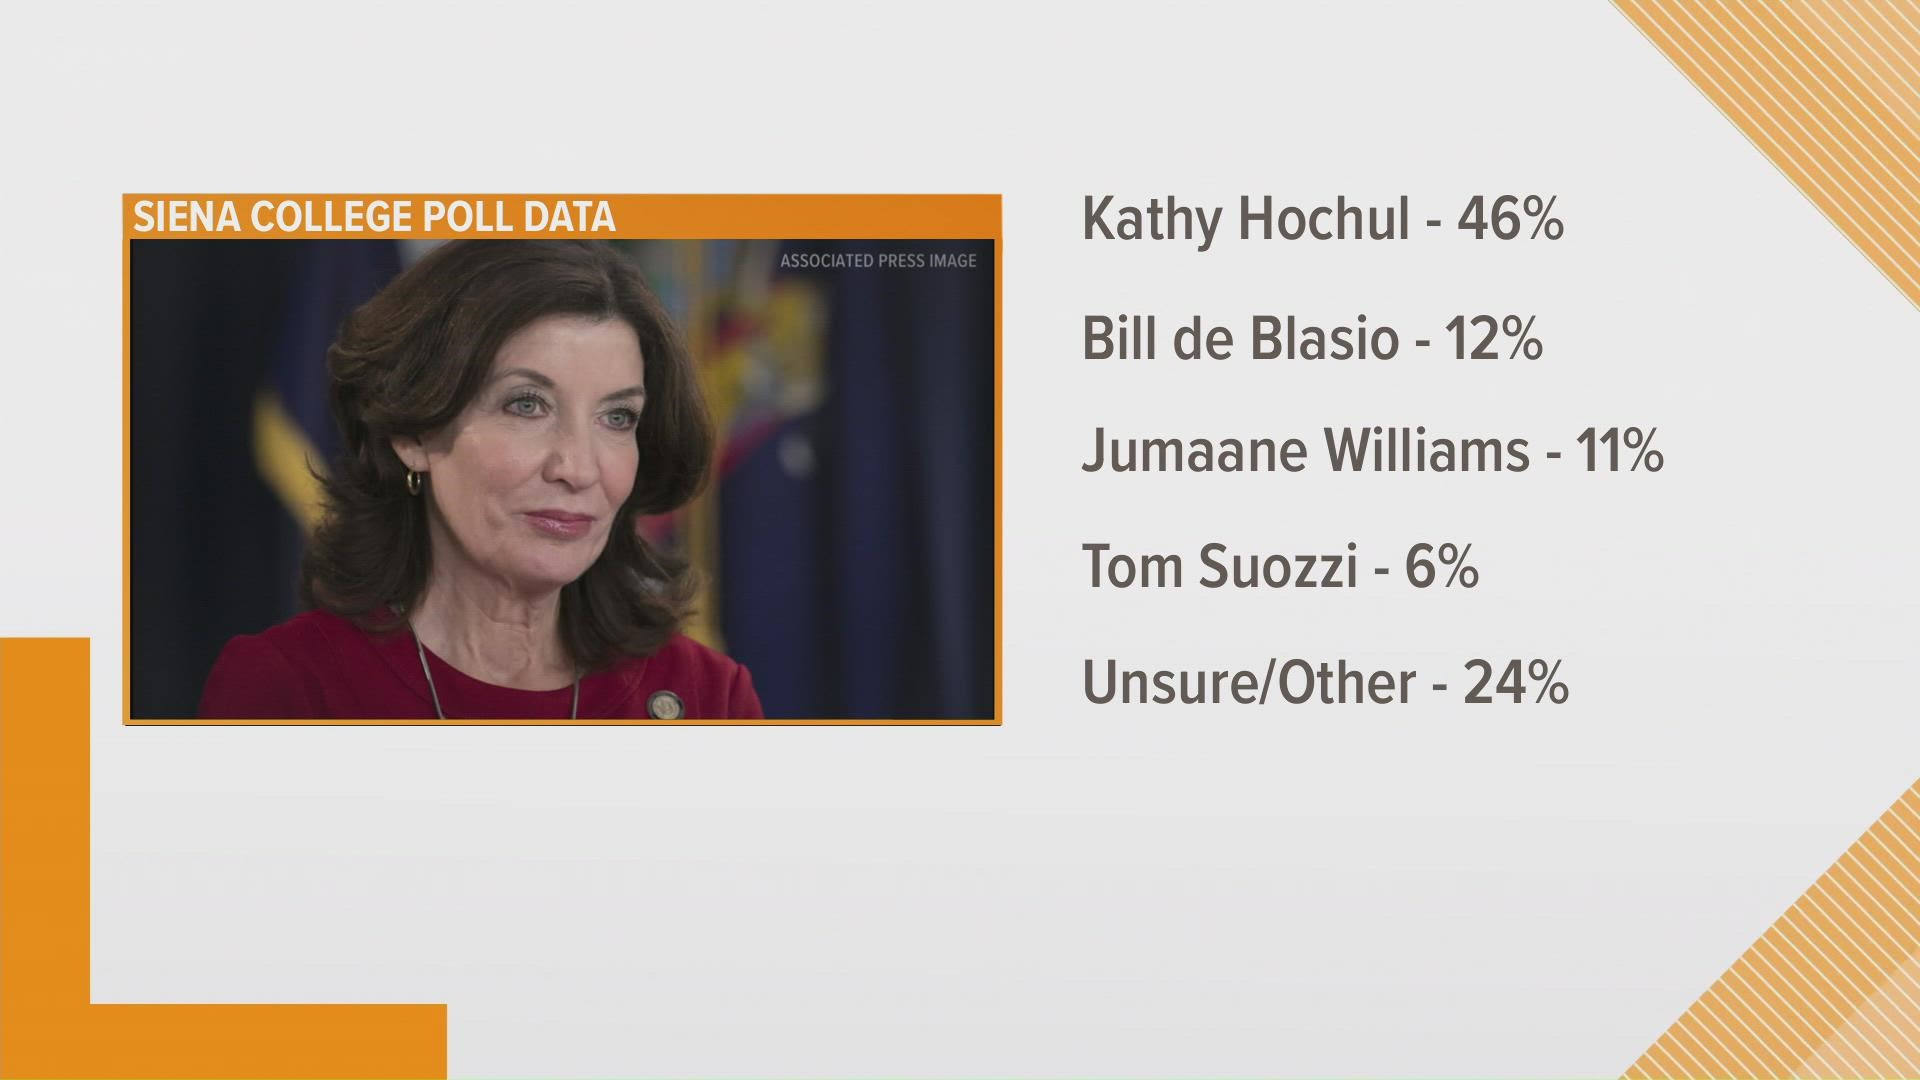 Hochul has an even bigger lead - with 65-percent support among upstate democrats.